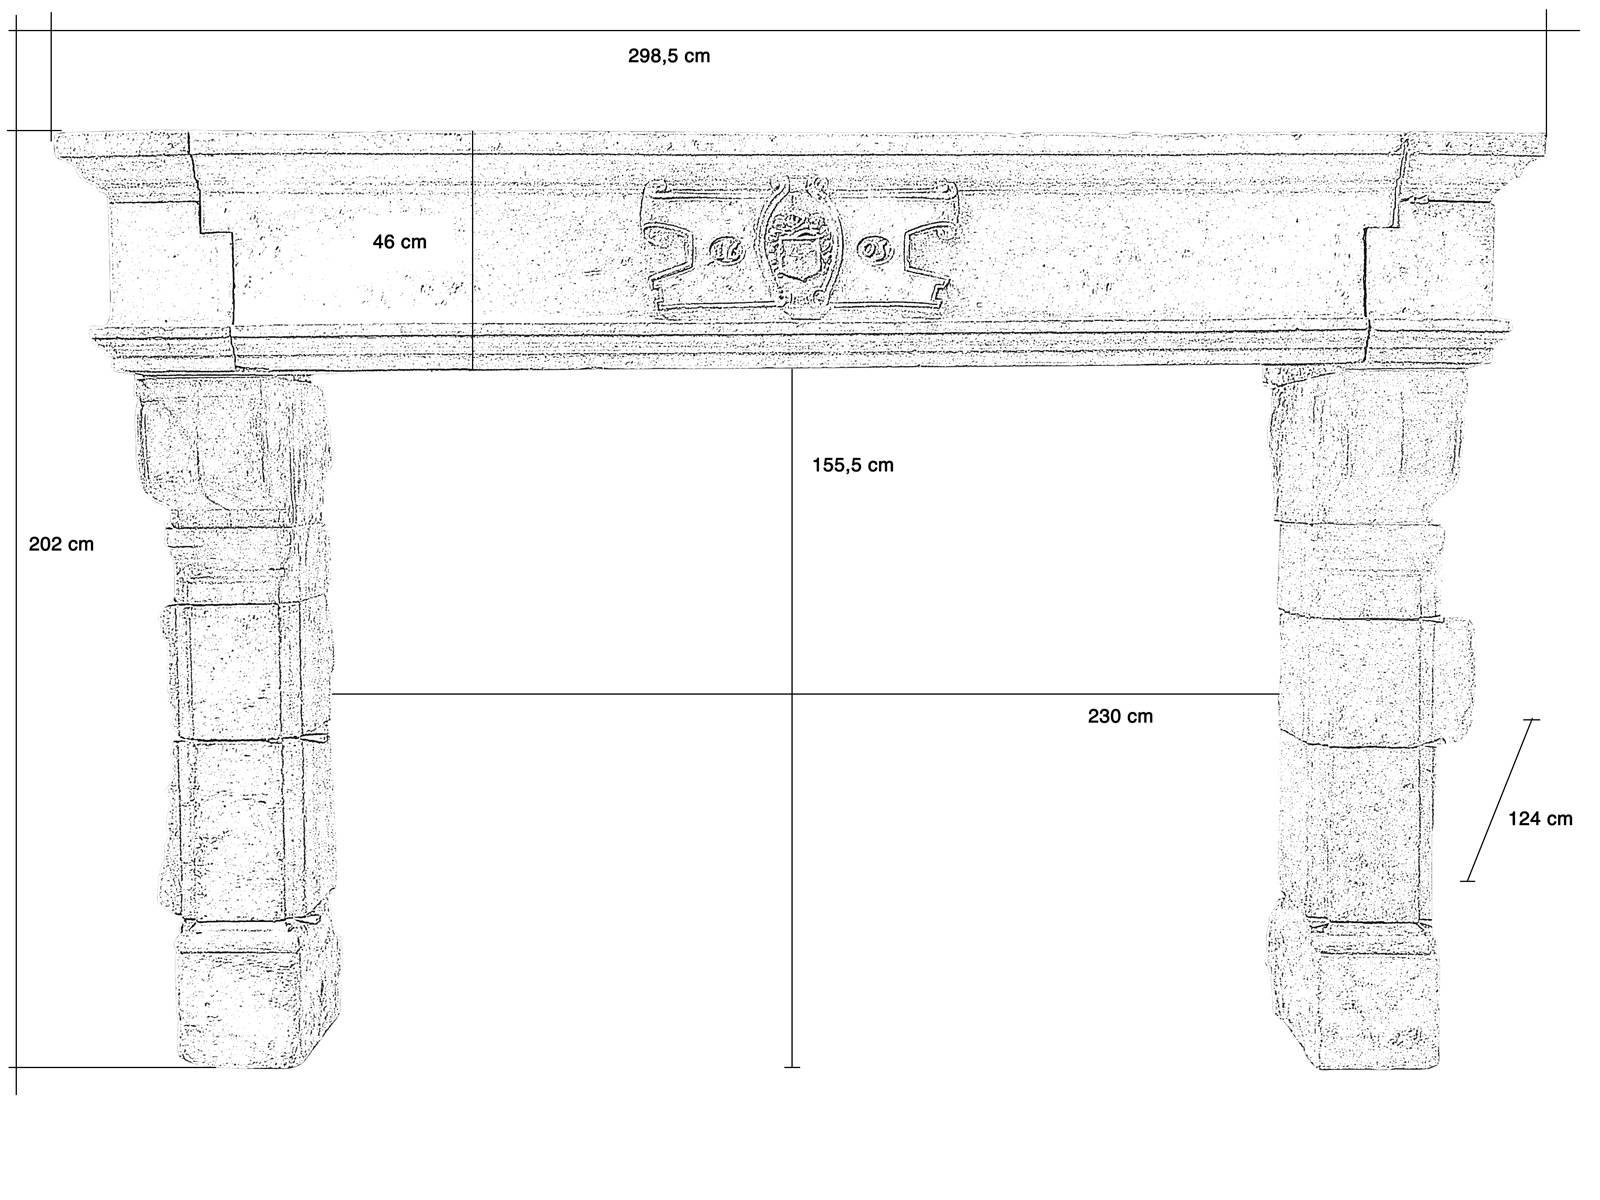 Dated from the beginning of the 17th century, Louis 13 limestone fireplace. The monolith lintel rests on the legs via console corbels. The cornice presents multiple setbacks. In the center of the lintel, there is a cartouche decoration called 